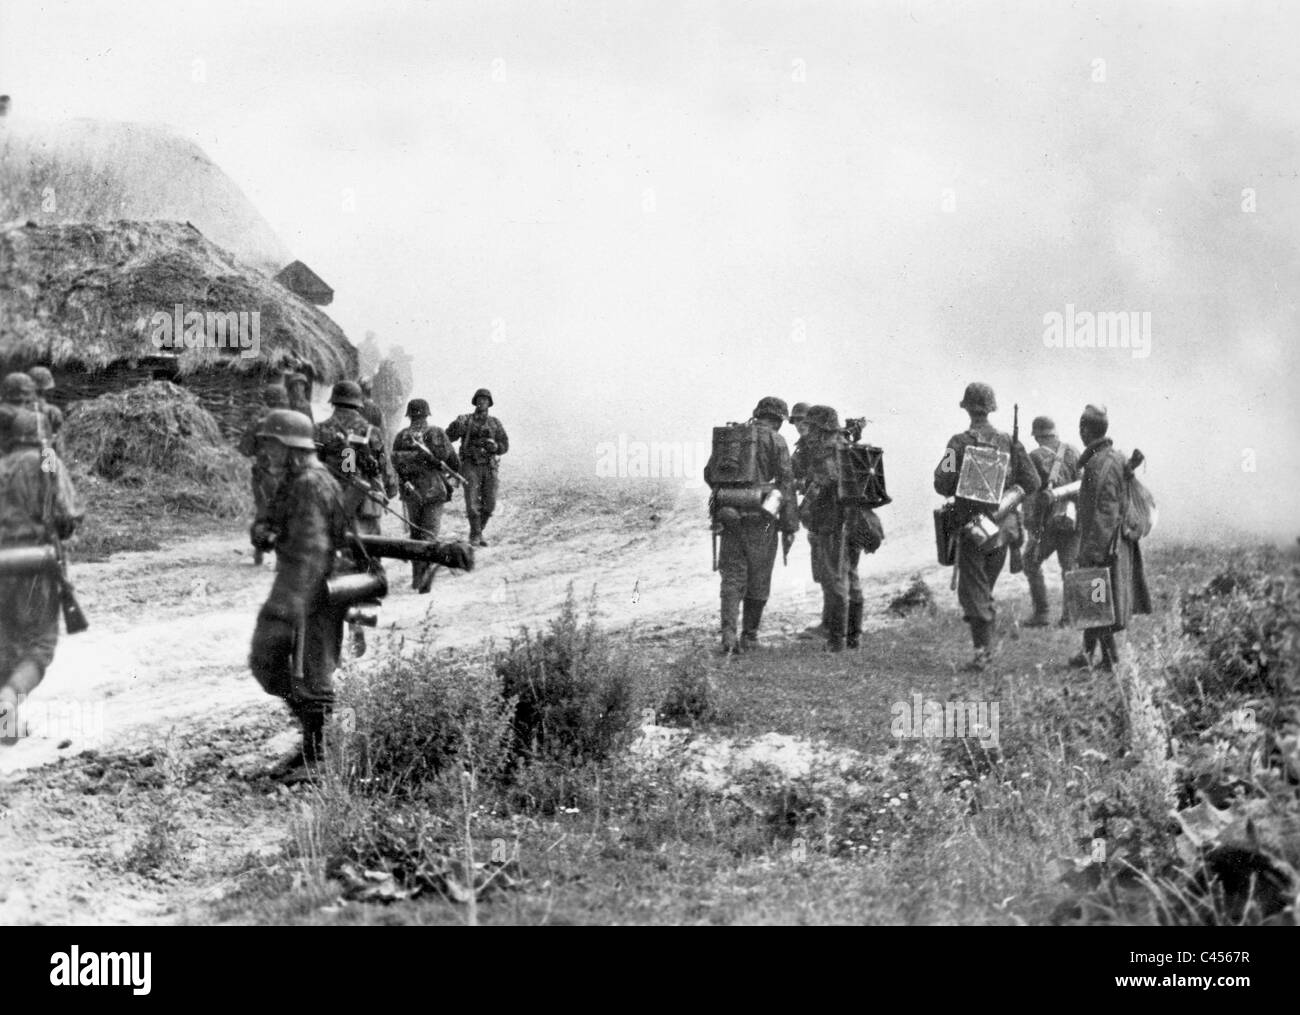 Waffen ss at kursk Black and White Stock Photos & Images - Alamy